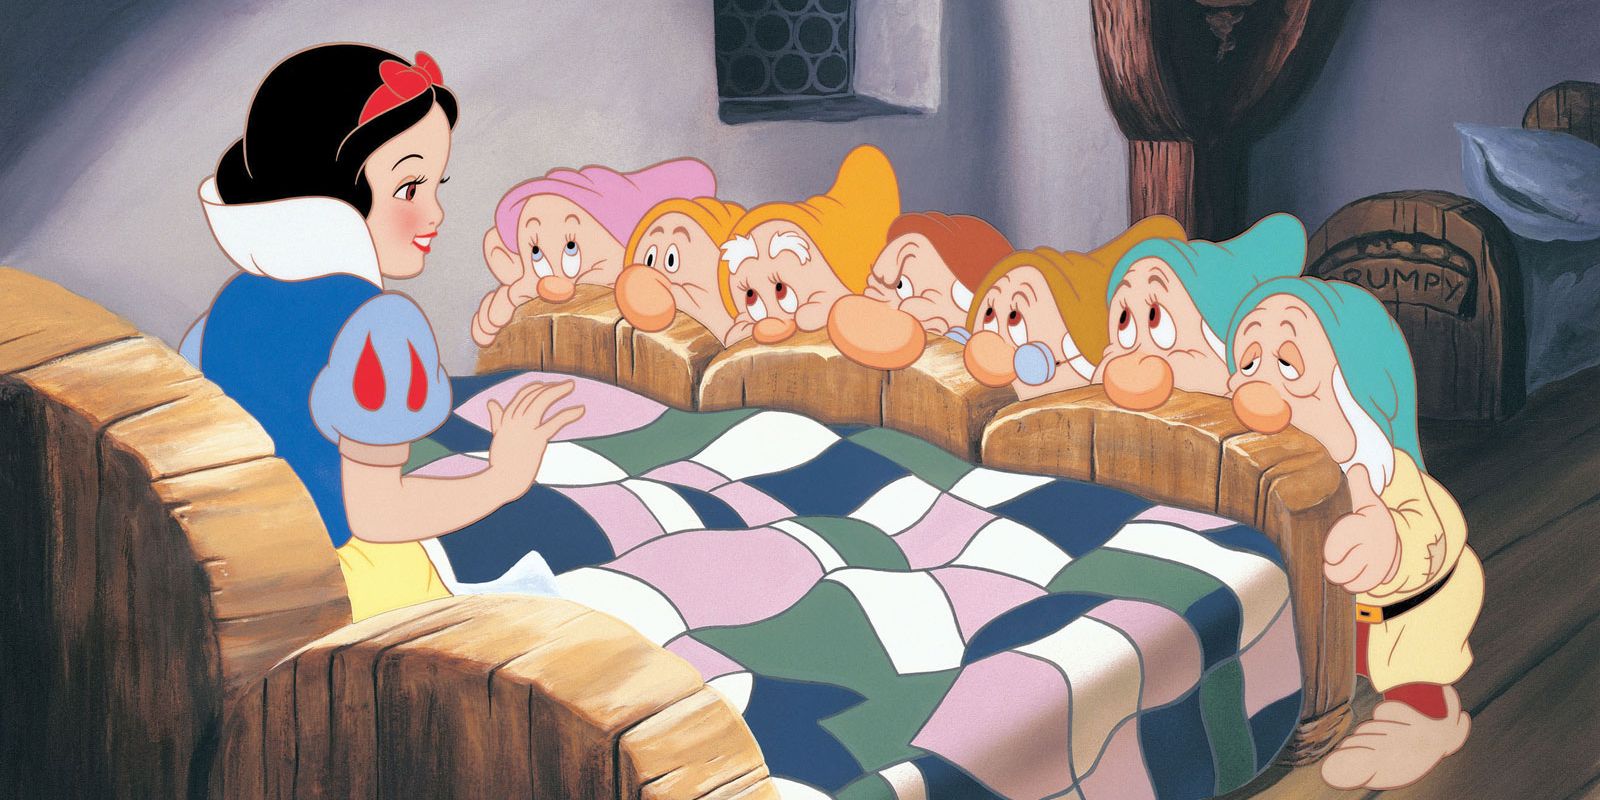 Snow White and the Seven Dwarfs Snow White in Bed